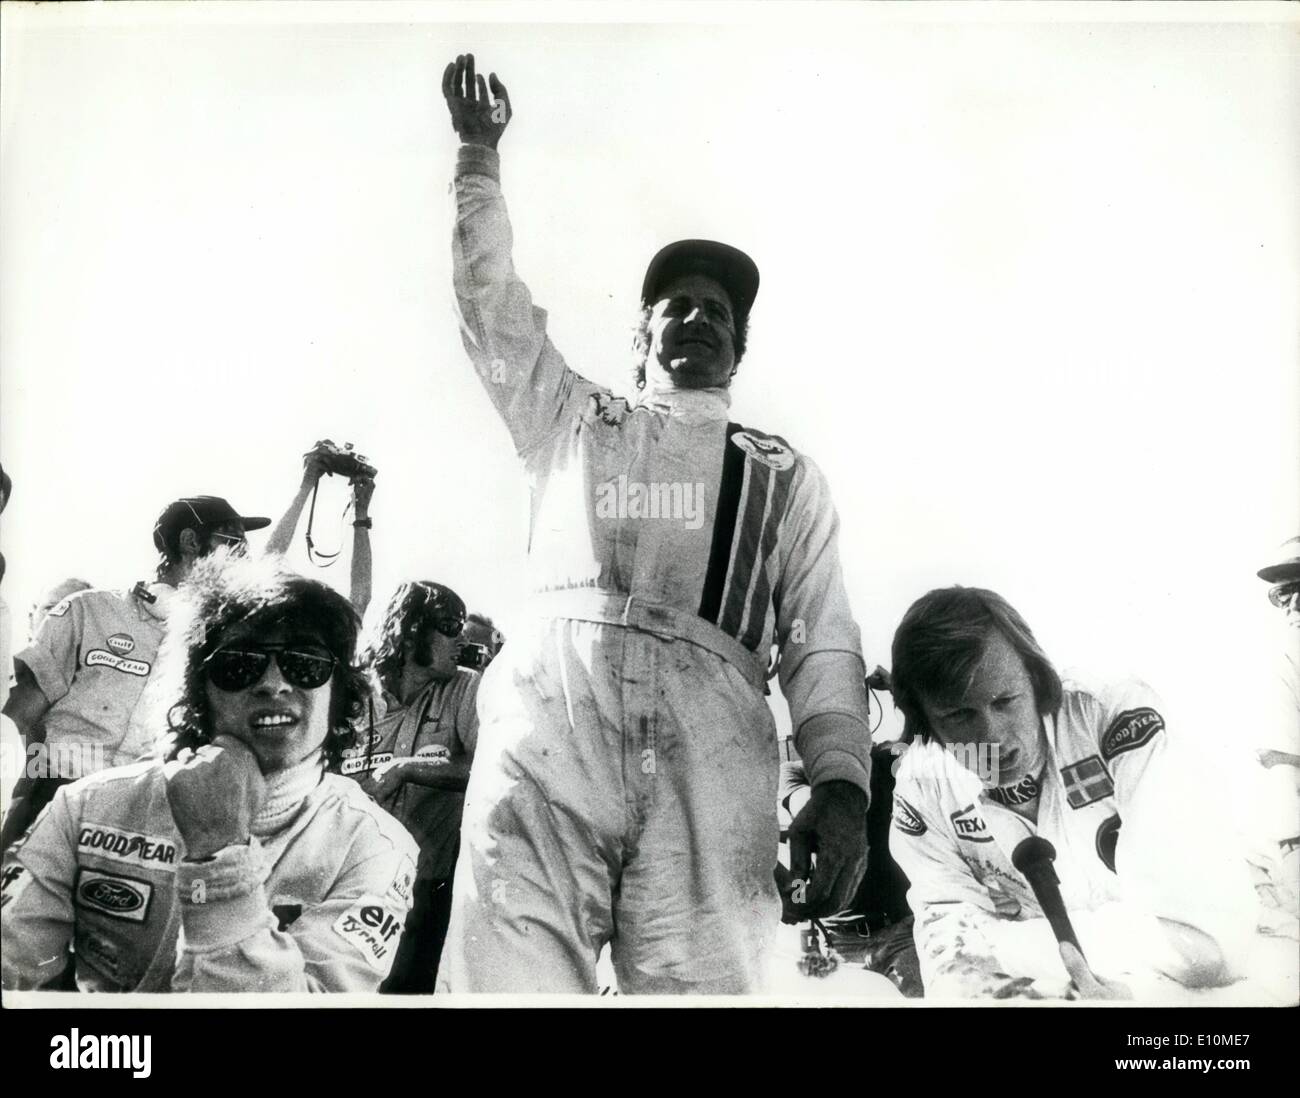 Jun. 06, 1973 - Denny Hume of New Zealand Wins the Swedish Grand Prix. Denny Hume the New Zealand racing Driver driving a McLaren won the Swedish Grand Prix in Anderstorp Sweden on Sunday. OPS: After the race Denny Hume seen raising his hand after winning the Swedish Grand Prix, left is Francois Cevert, who was third , and right, Ronnie Peterson second. Stock Photo